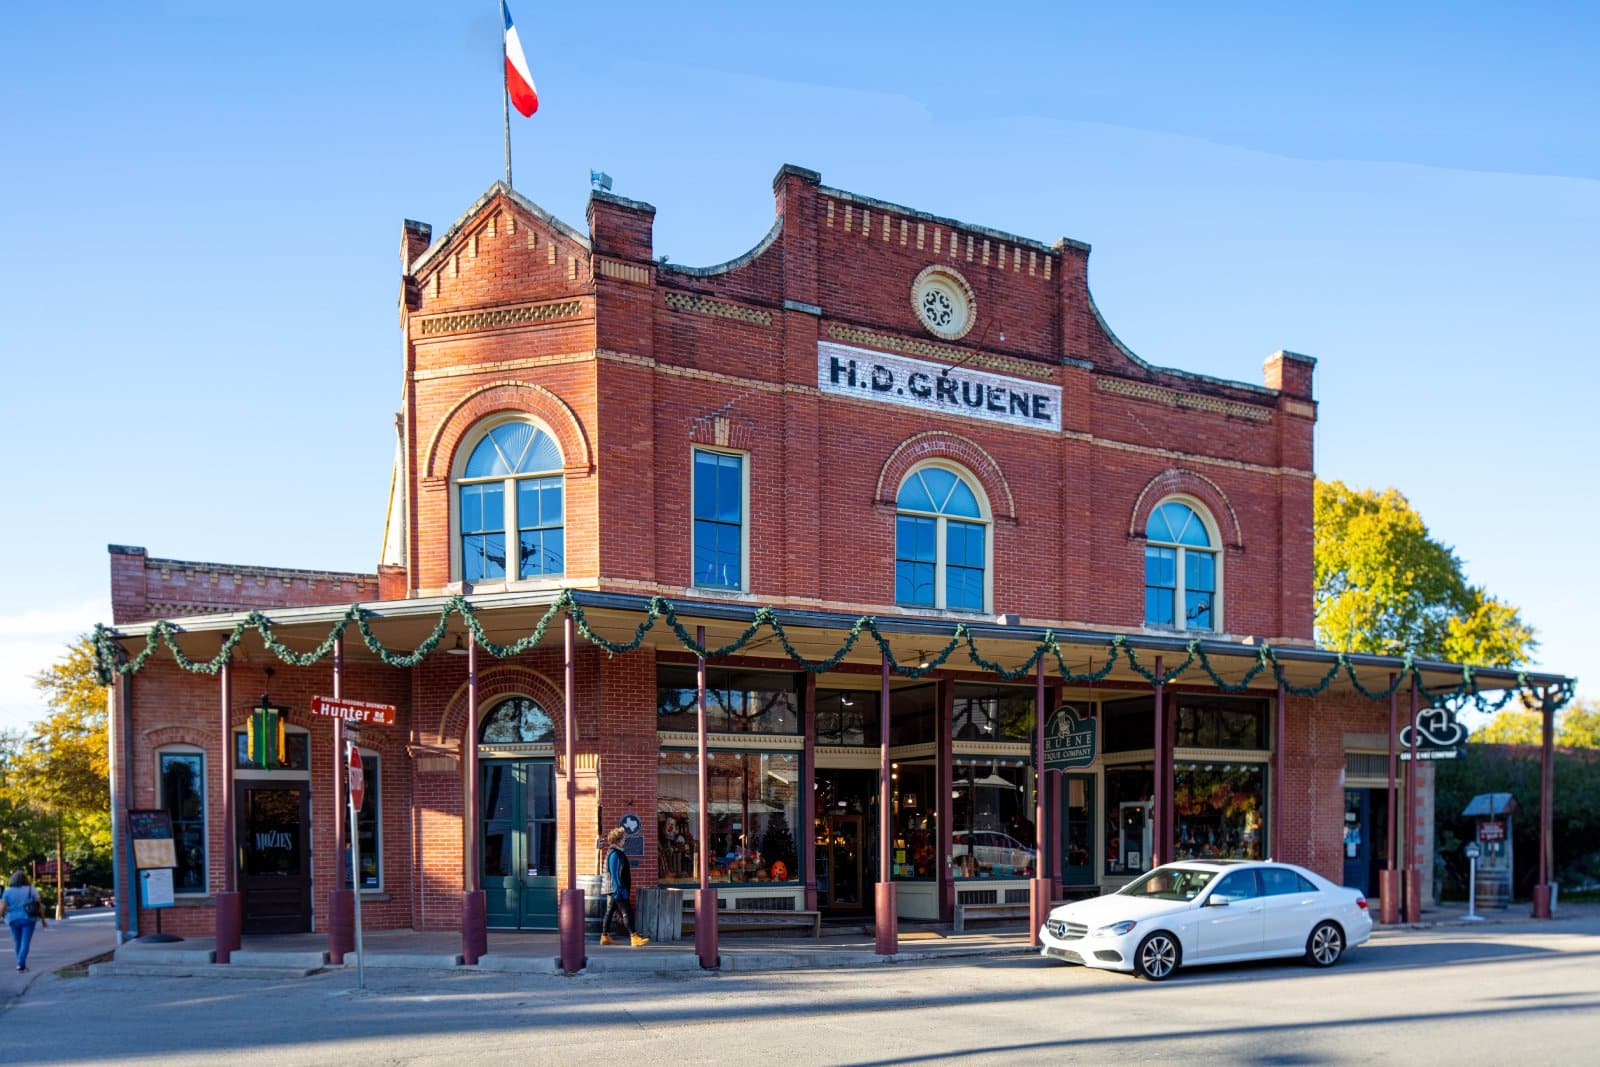 <p><span>Step back in time in this charming town, home to the oldest dance hall in Texas, Gruene Hall. Browse antique shops, enjoy live music, and dine at the Gristmill. There’s no entry fee, but bring some cash for shopping and dining.</span></p>